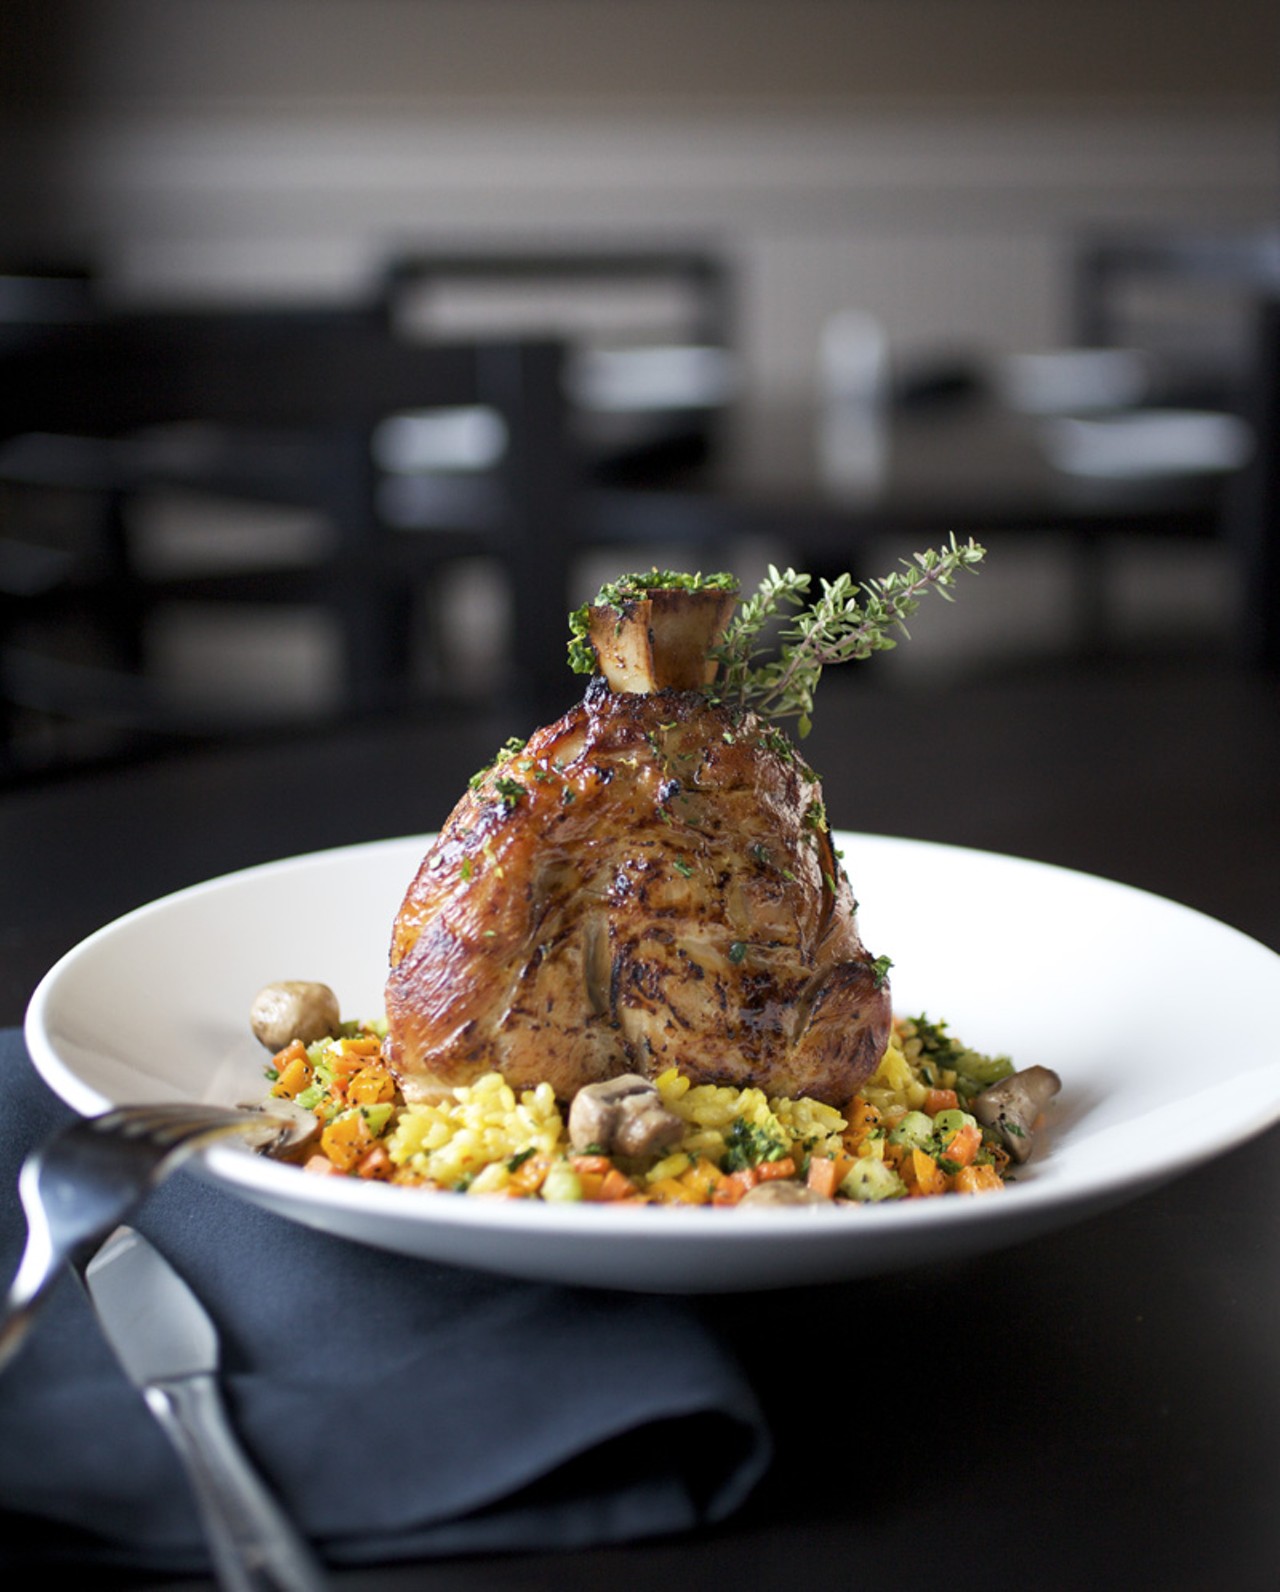 The Pork Osso Buco is a slow roasted pork shank with risotto Milanese and roasted vegetables topped with natural au jus.